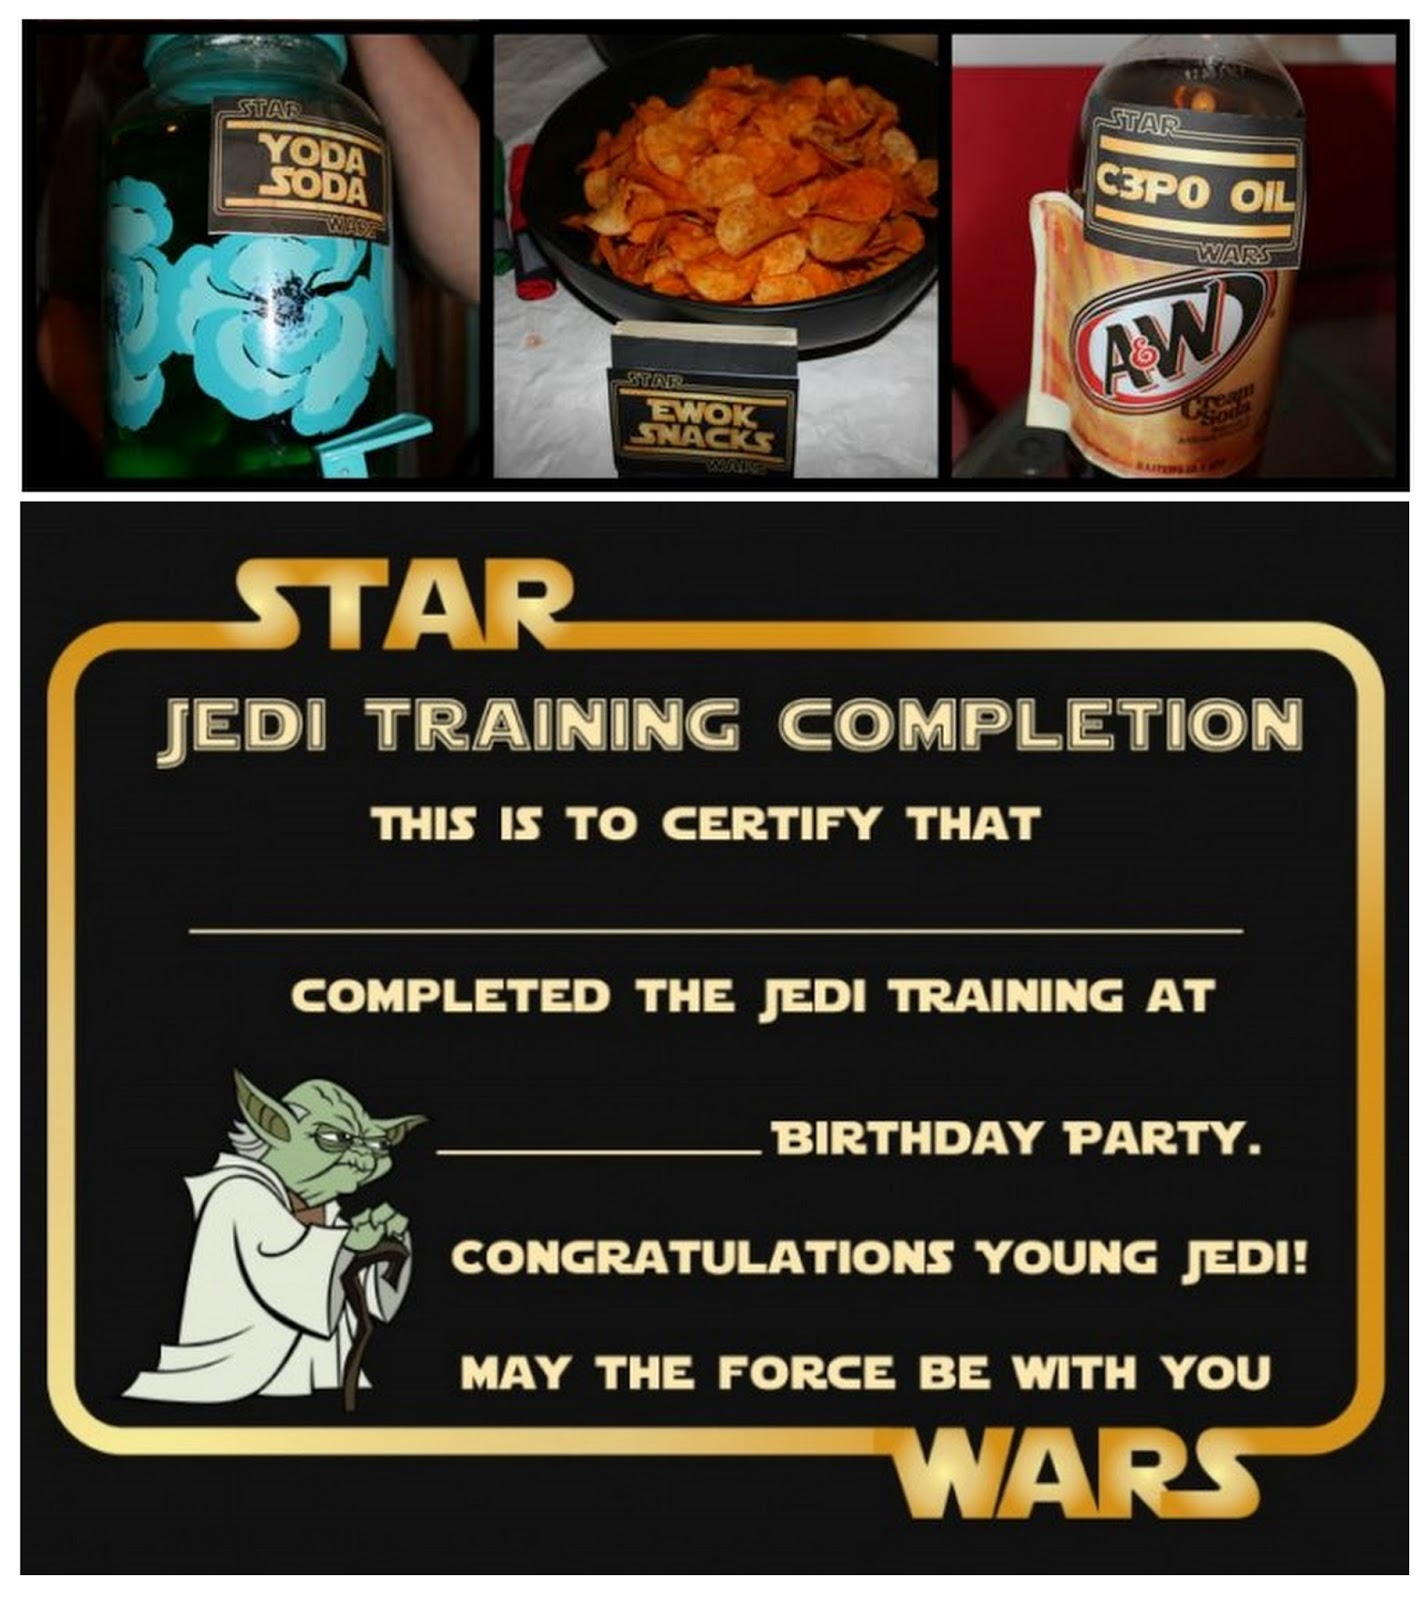 Star Wars Party: Free Printable Food Cards And Certificate. - Oh My - May The Force Be With You Free Printable